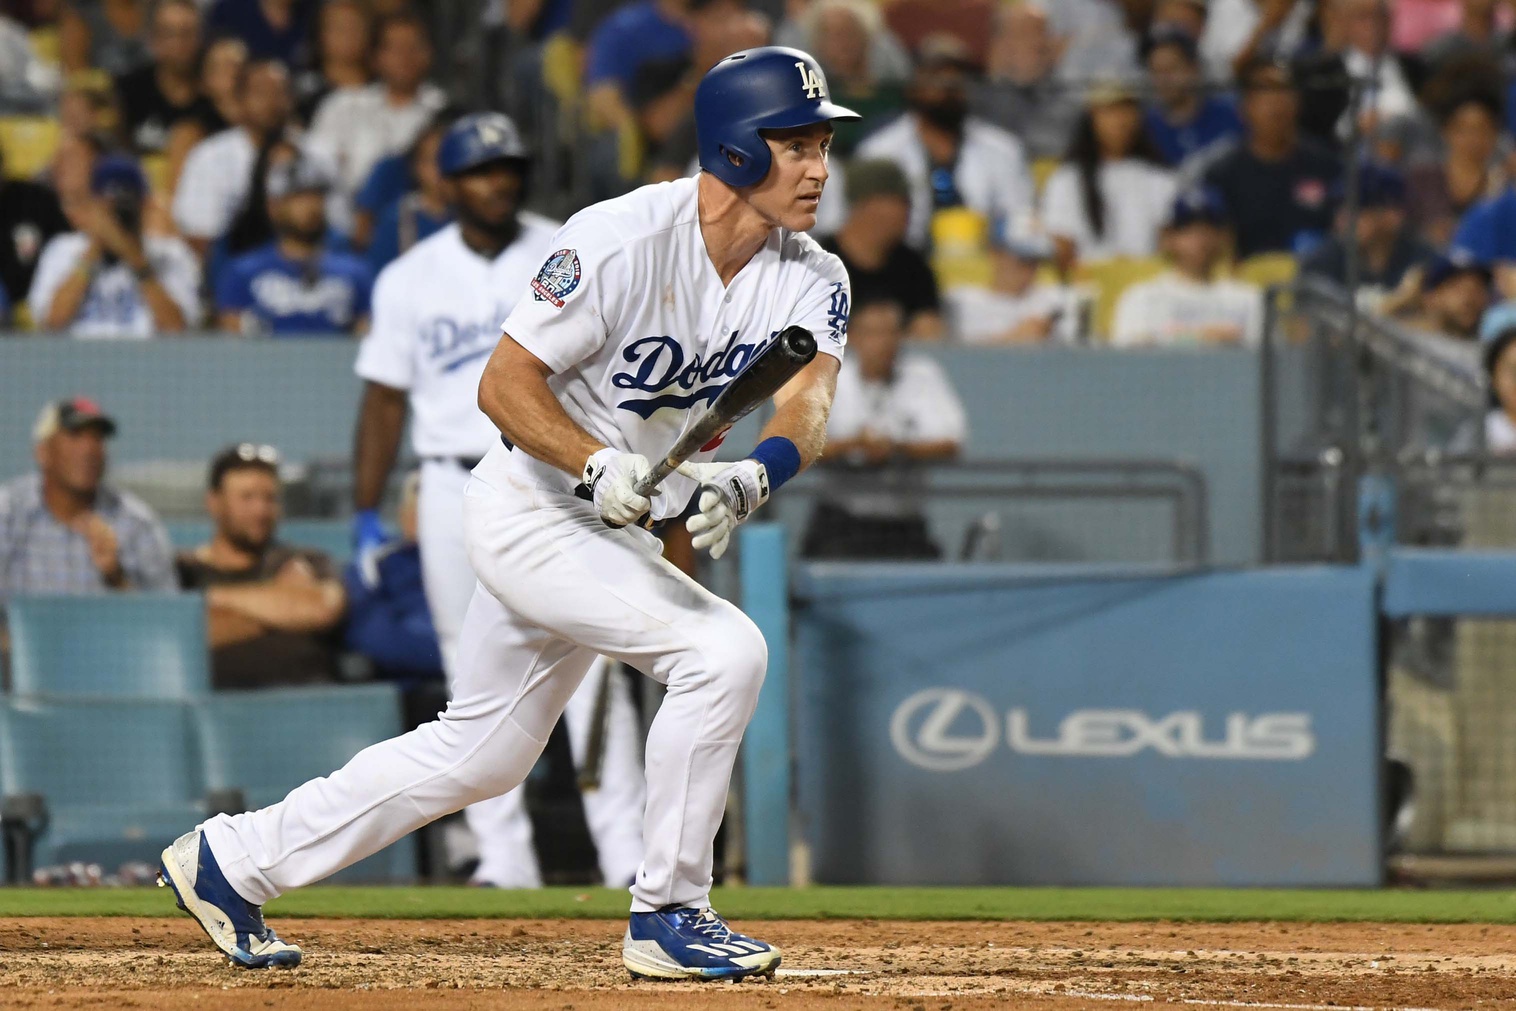 It Looks Like Chase Utley Is Going To Work For The Dodgers